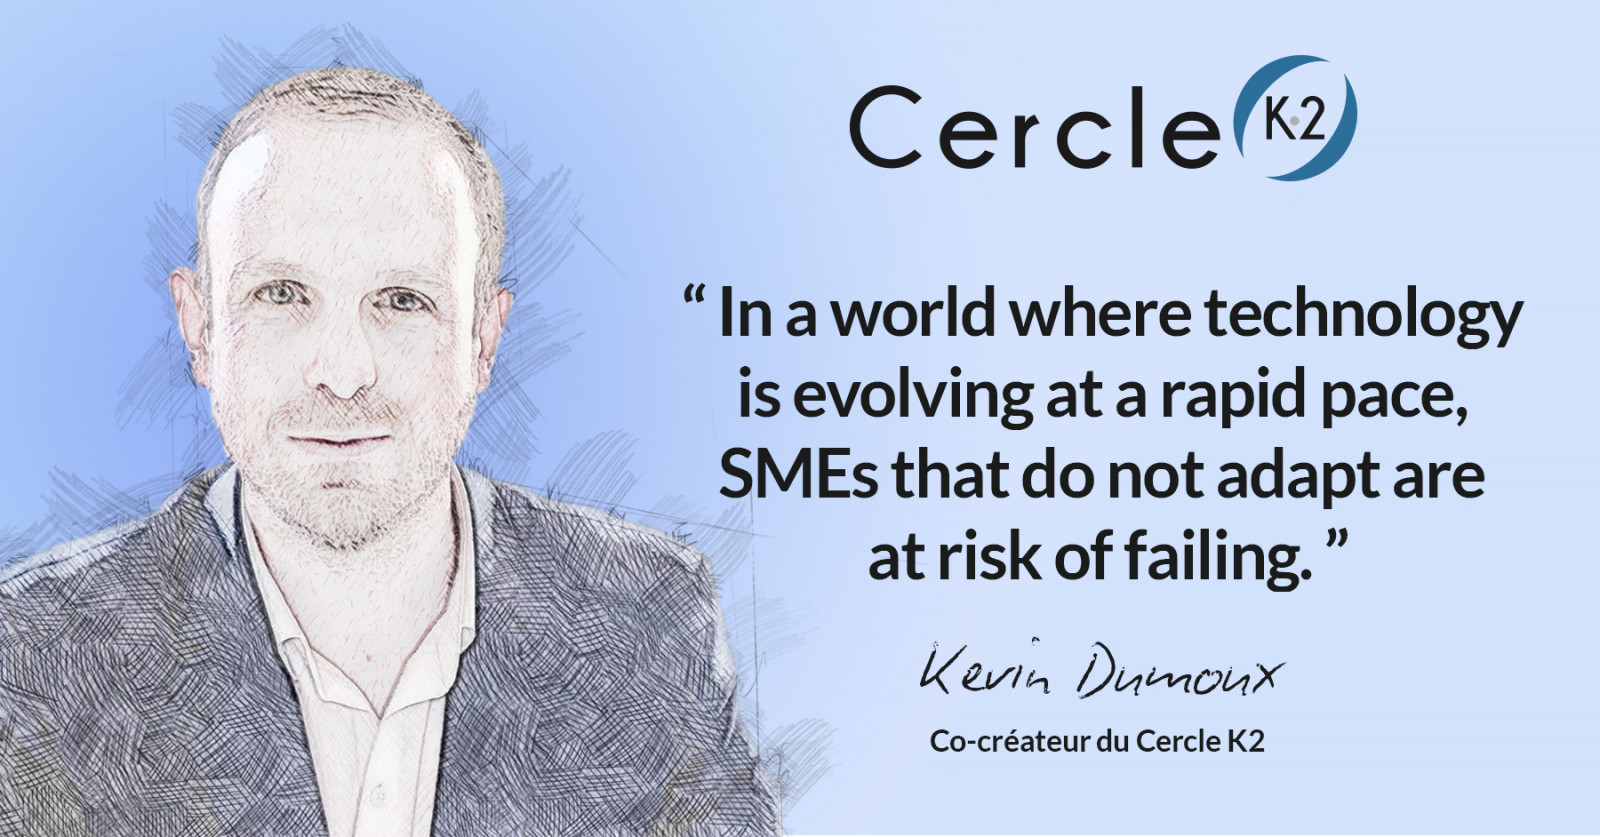 [ENGLISH VERSION] Growth and Innovation for traditional SMEs - Cercle K2